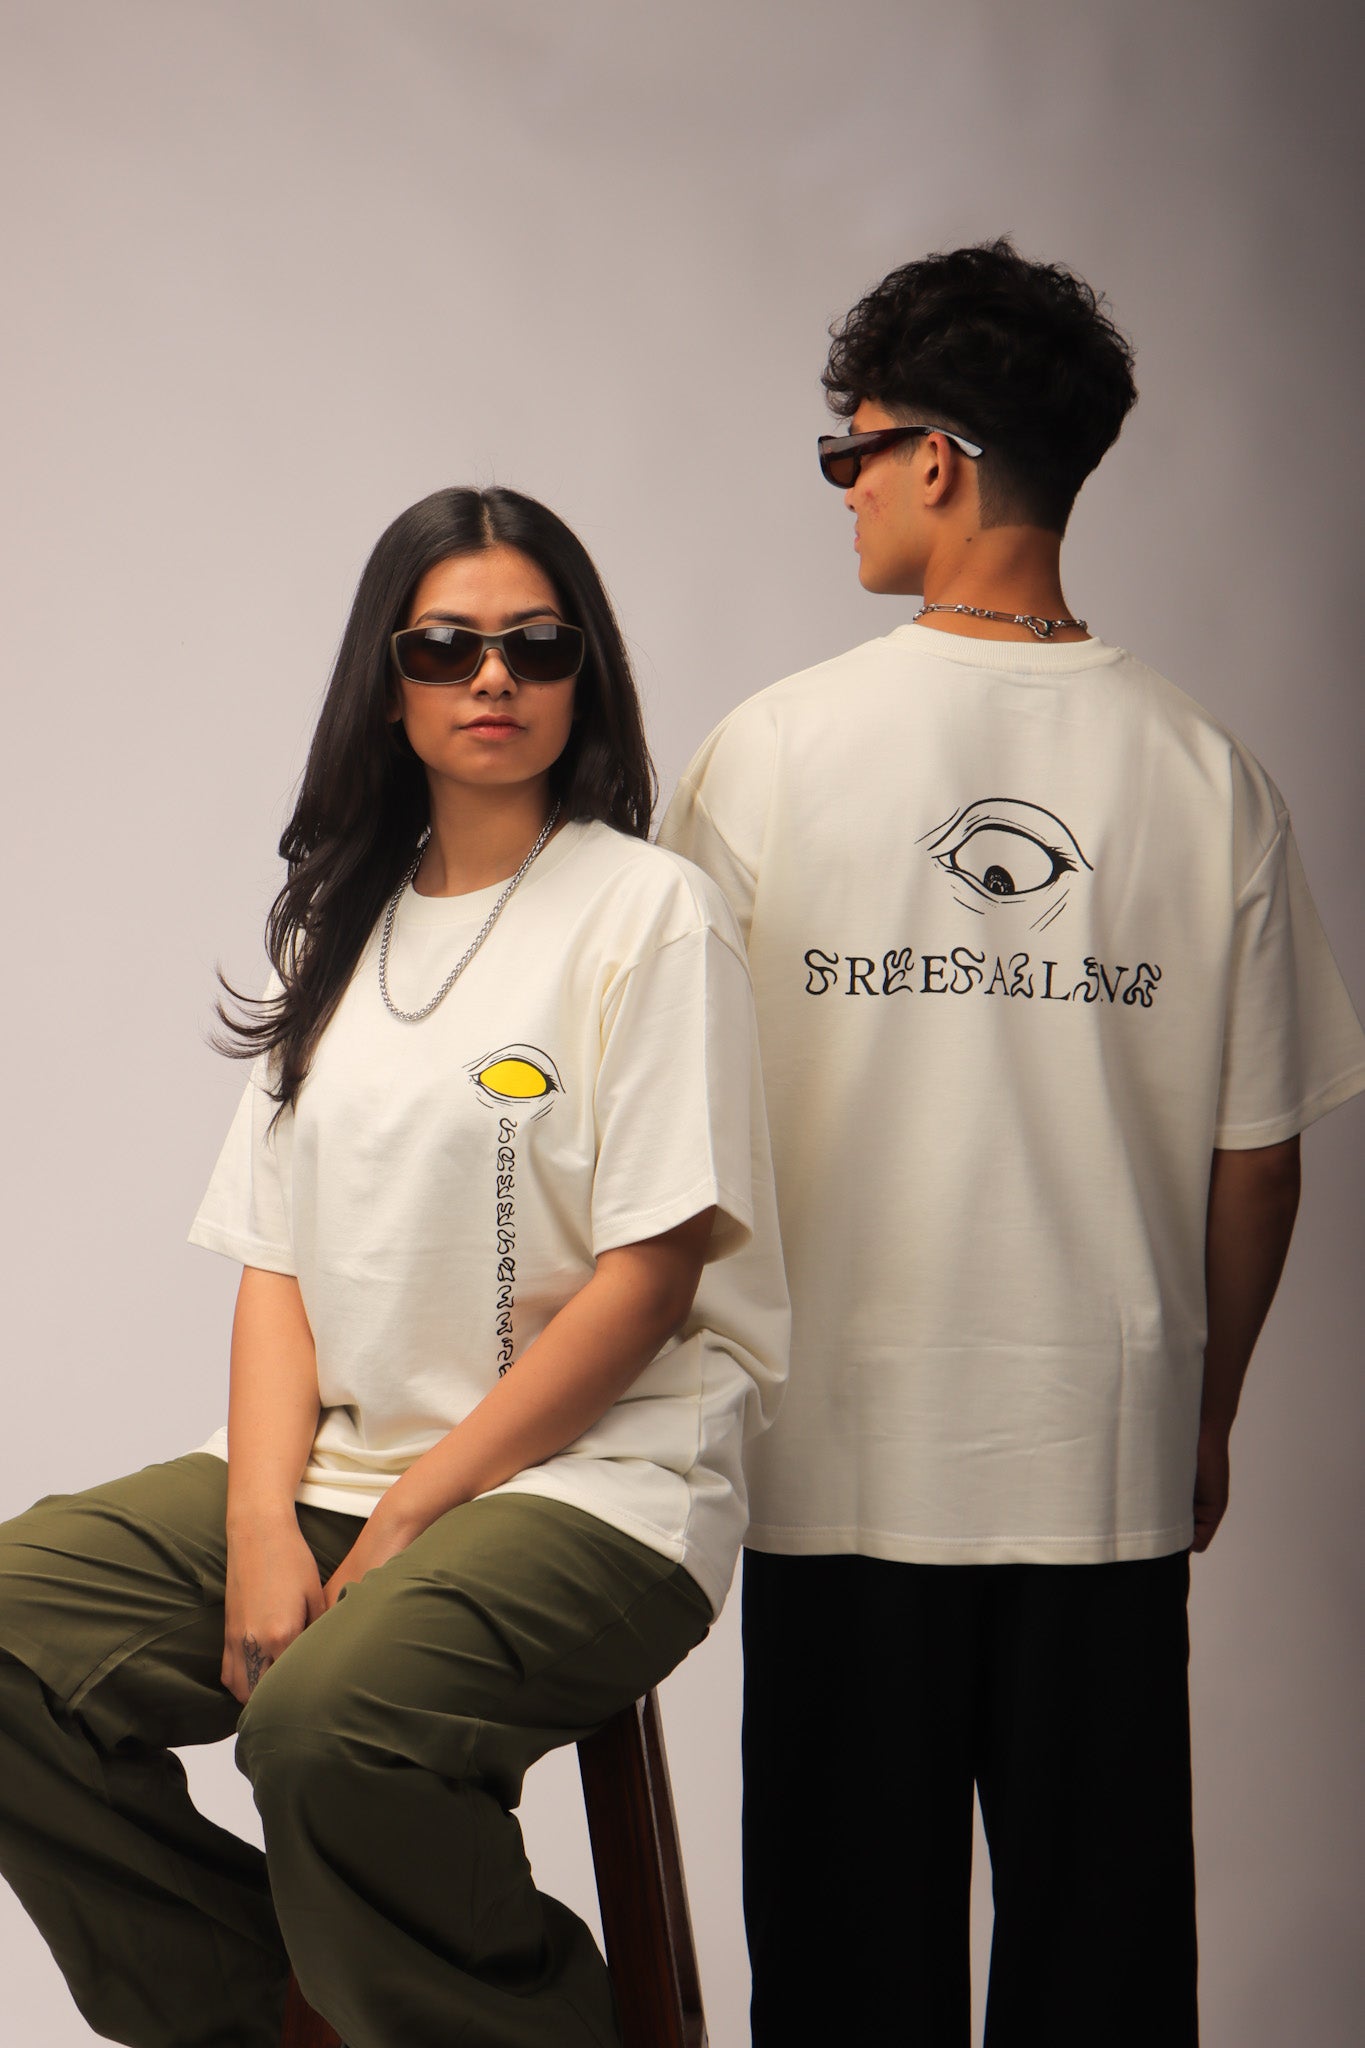 Tunnel Vision Tee - White